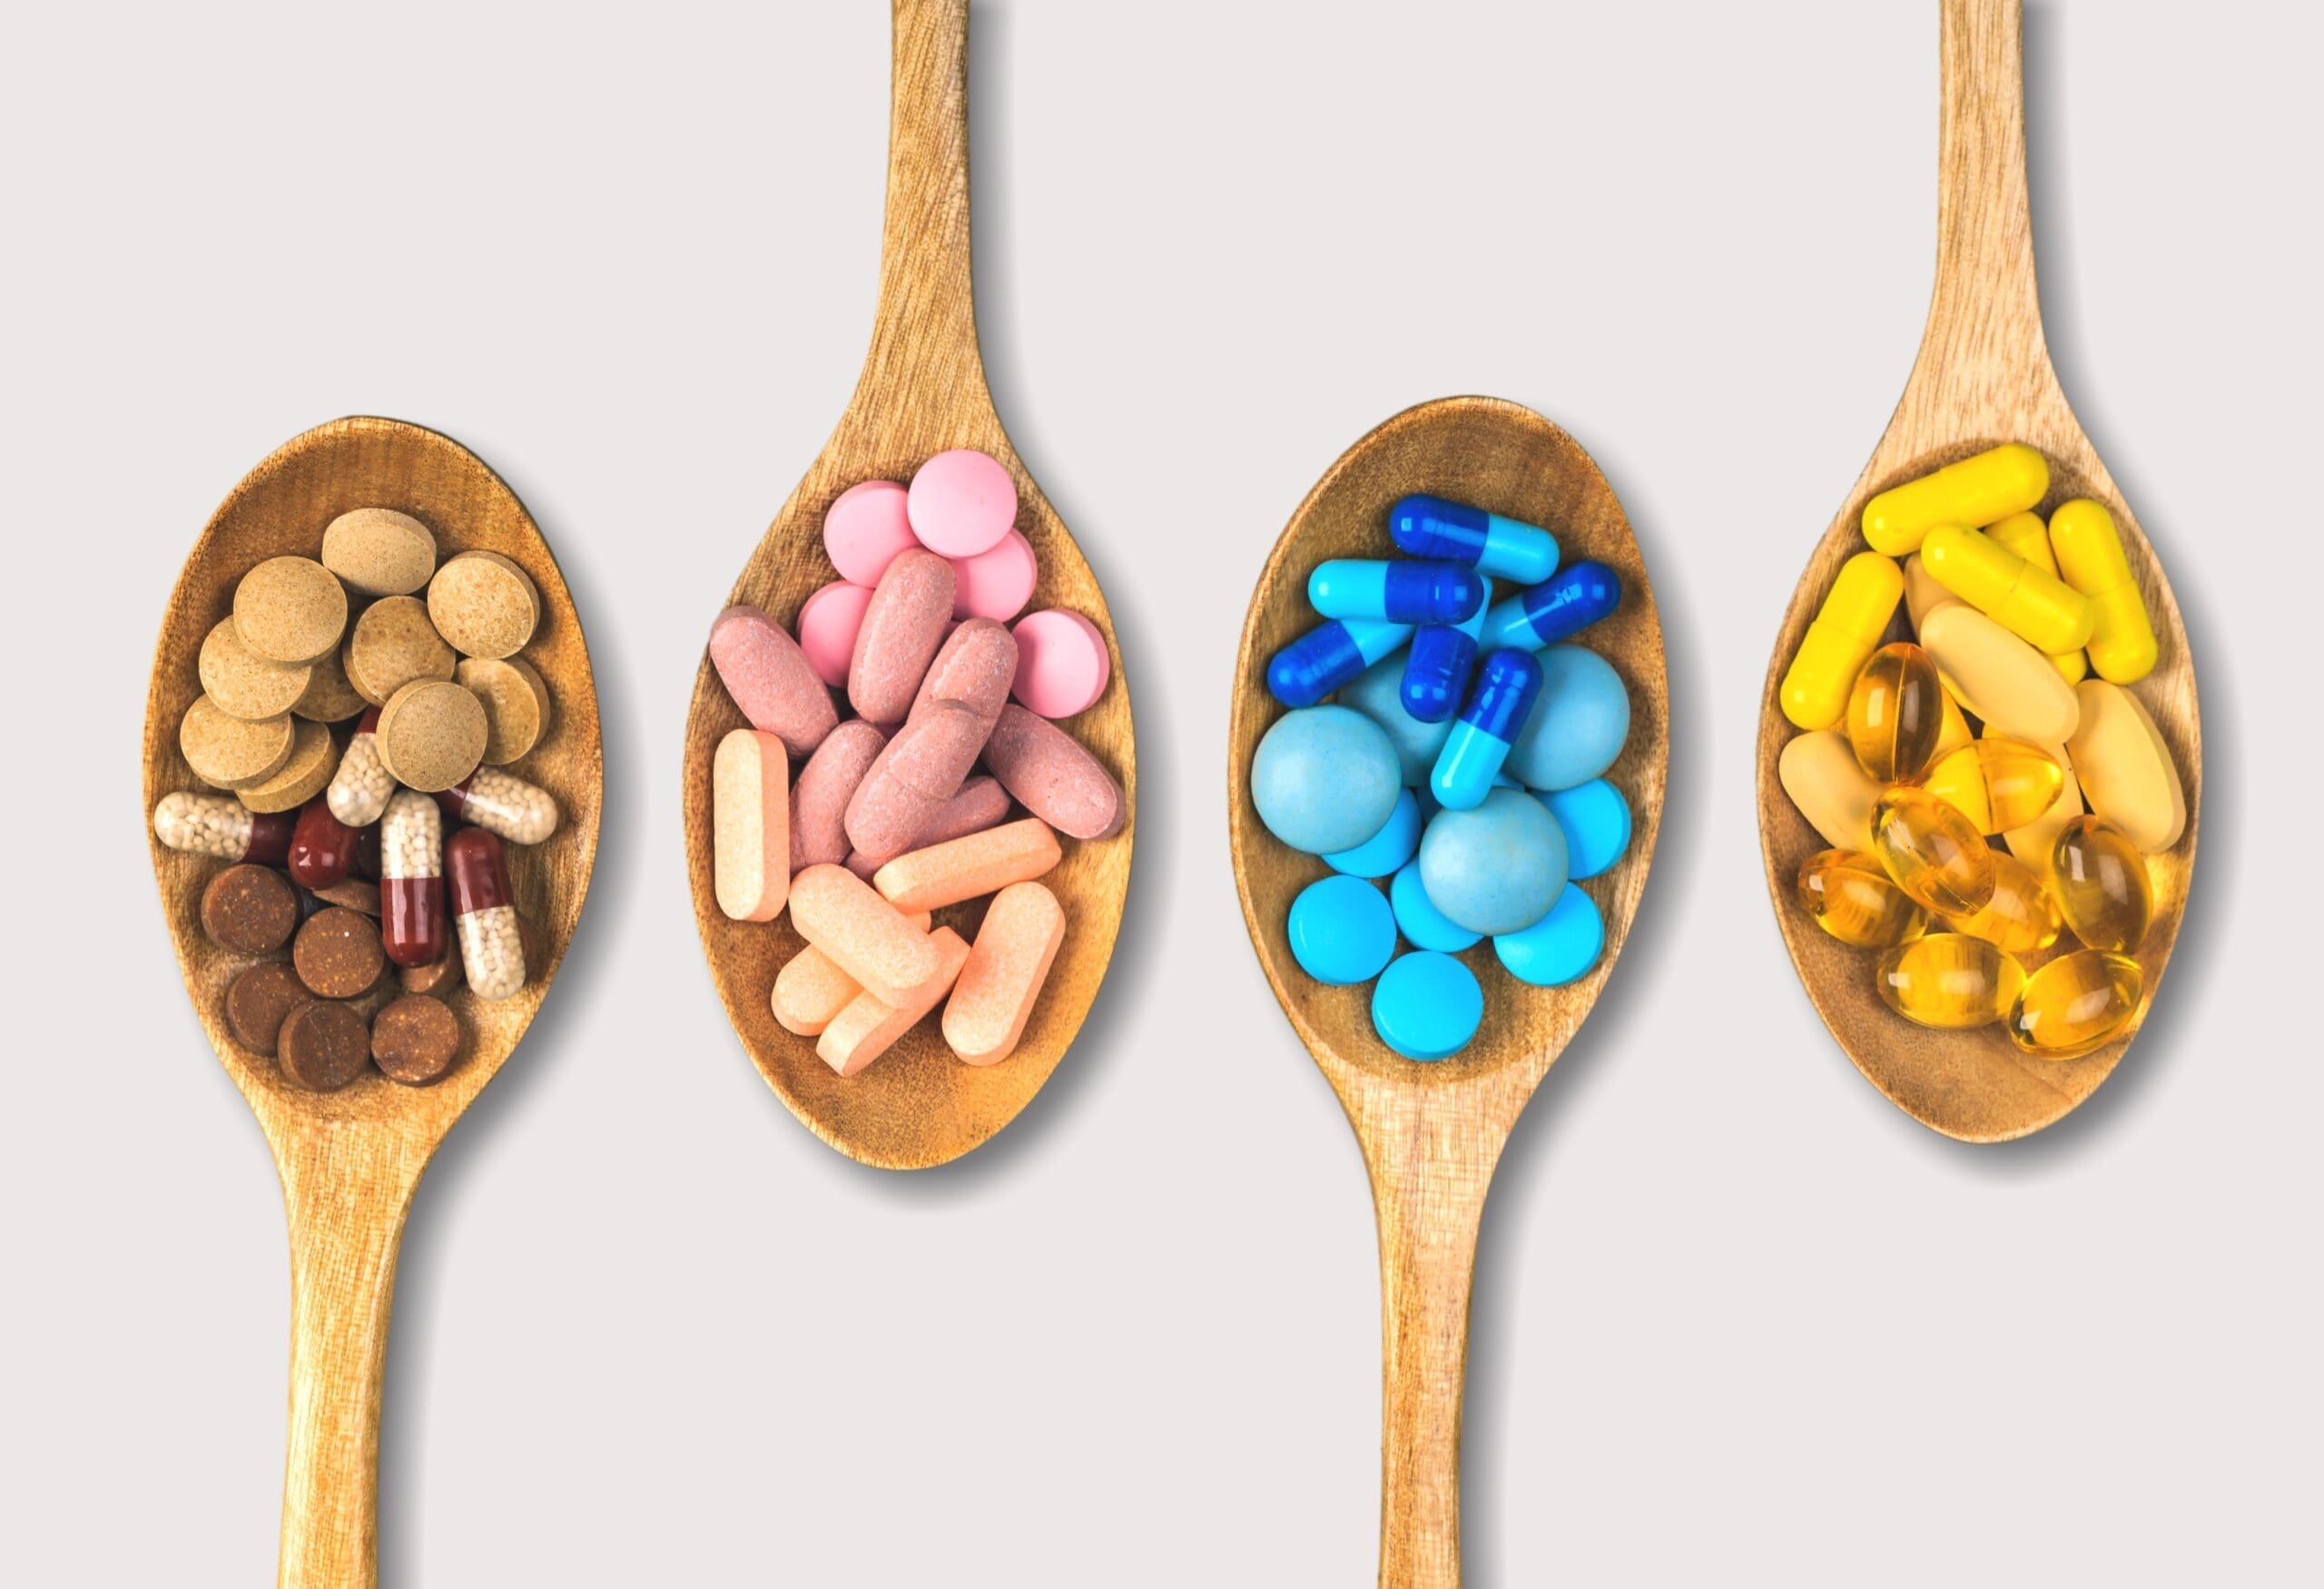 Will dietary supplements increase your longevity?